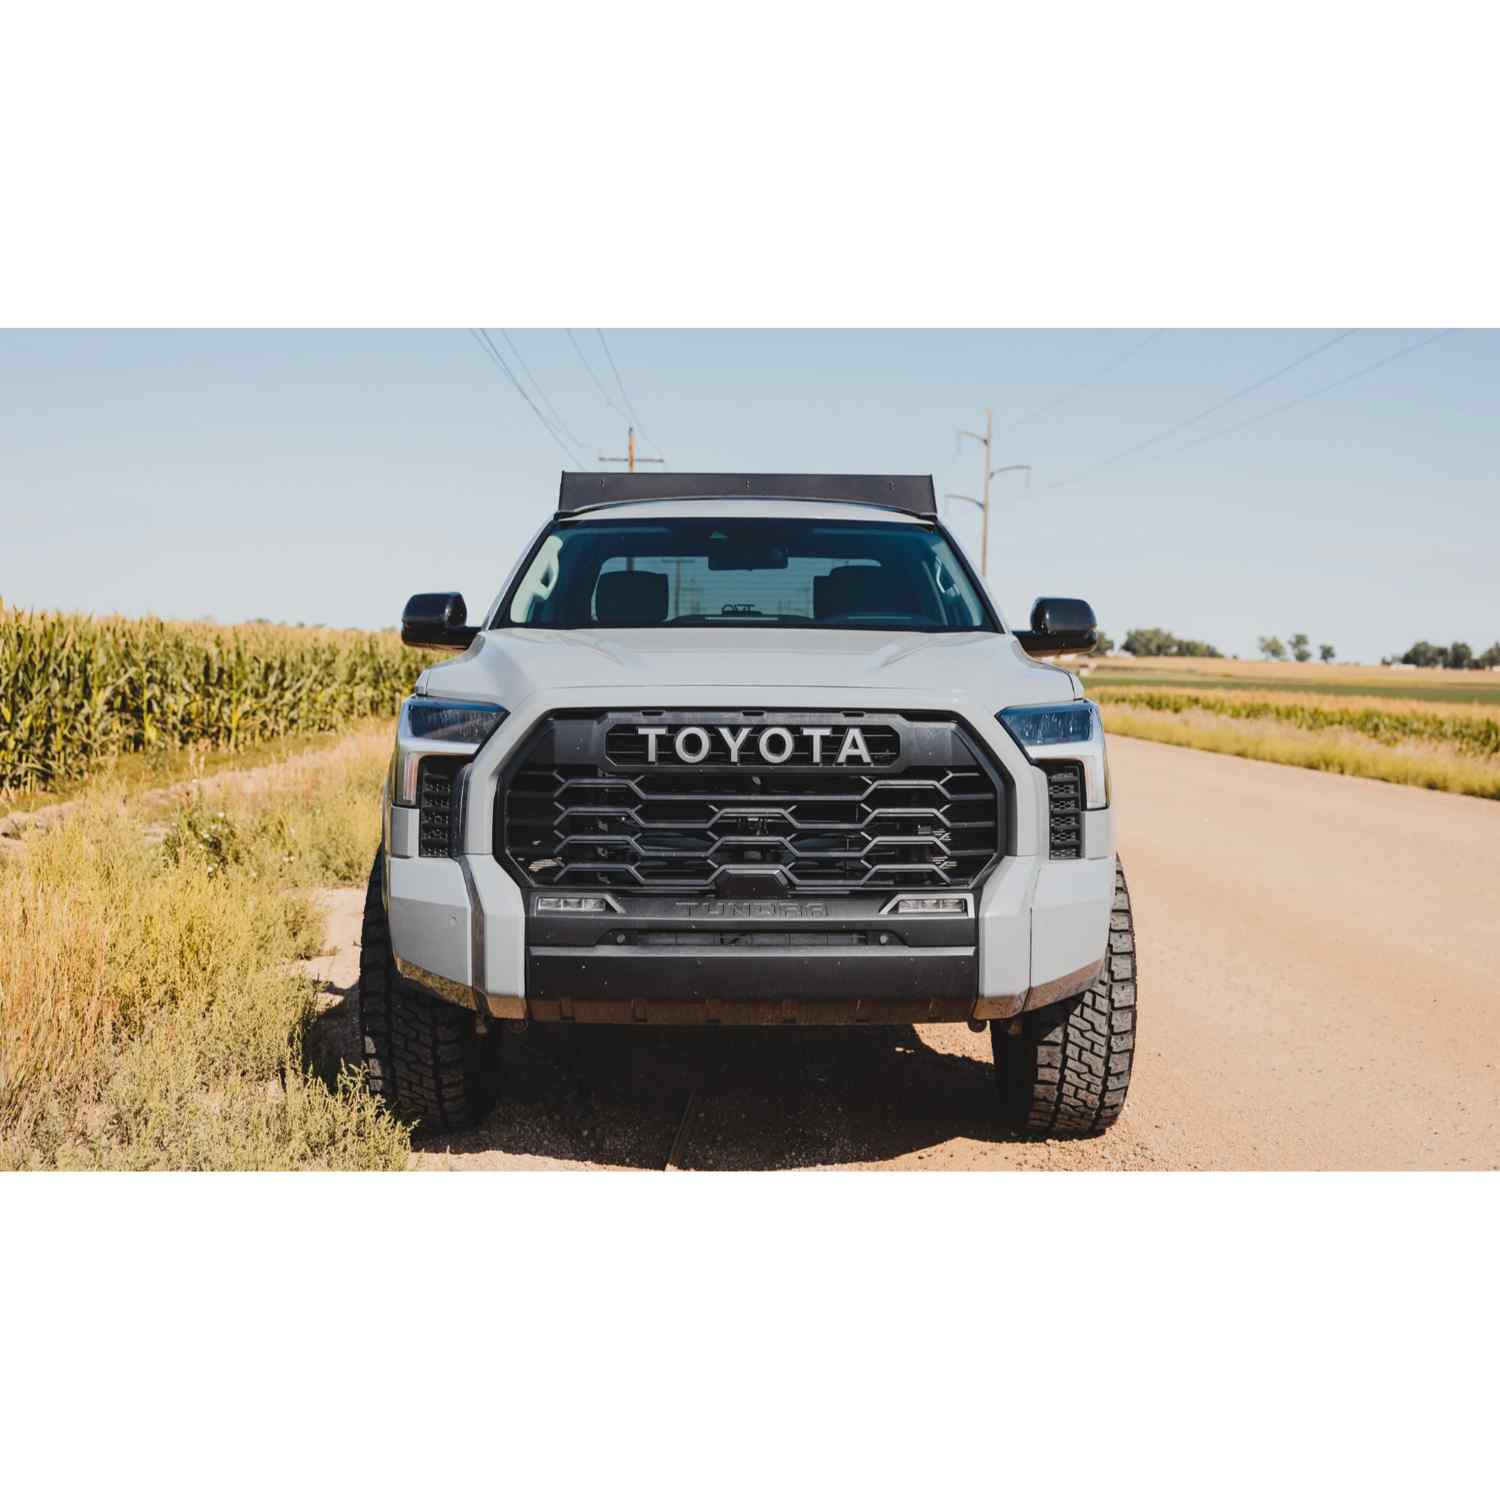 Sherpa Grizzly 2022-2023 Toyota Tundra Crewmax Roof Rack Front View